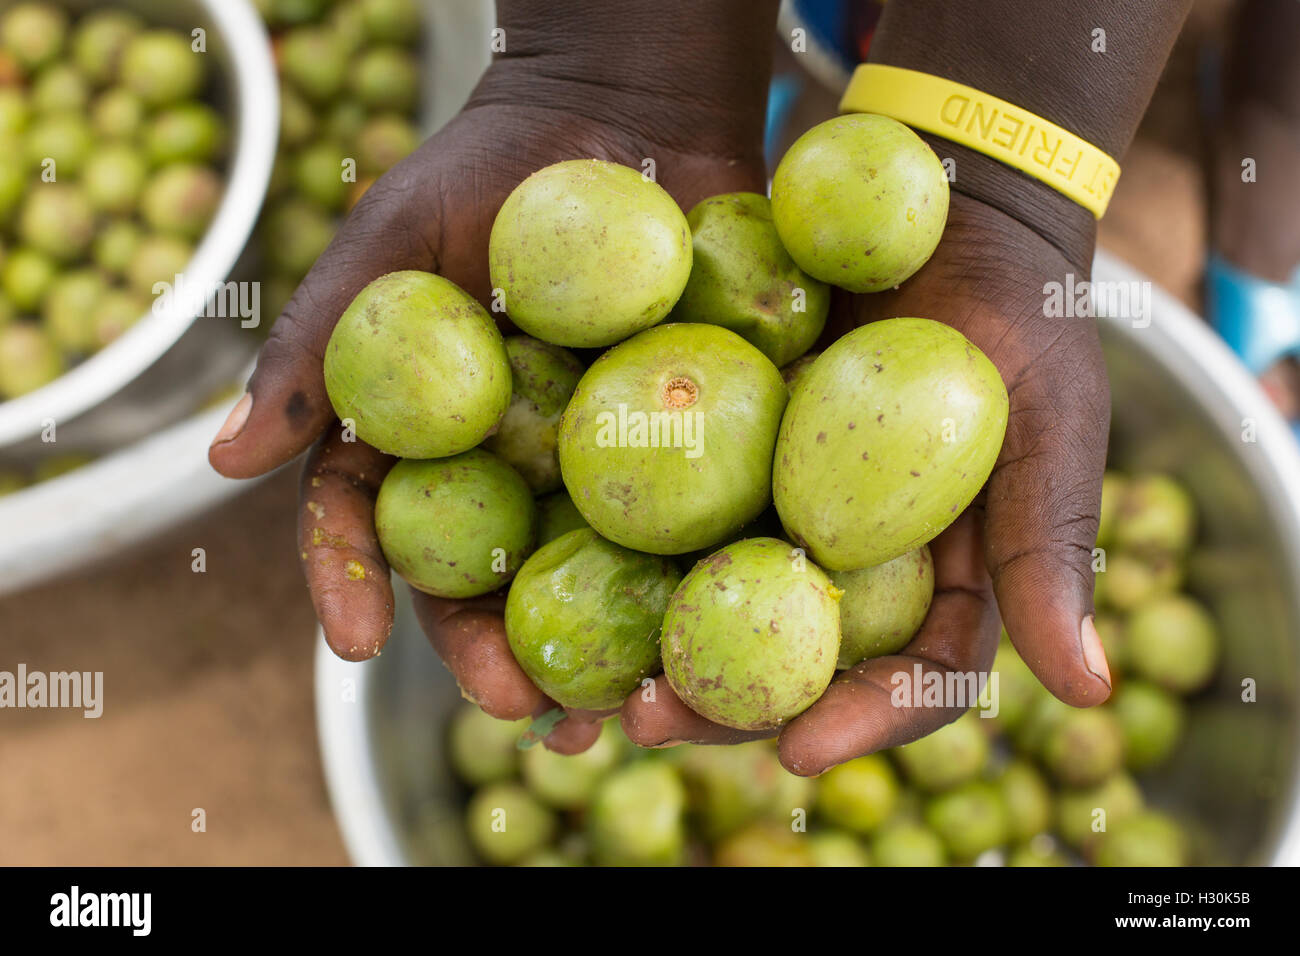 Women collect fallen shea fruit, the nut from which is used for making shea butter and oil, in Burkina Faso, Africa. Stock Photo